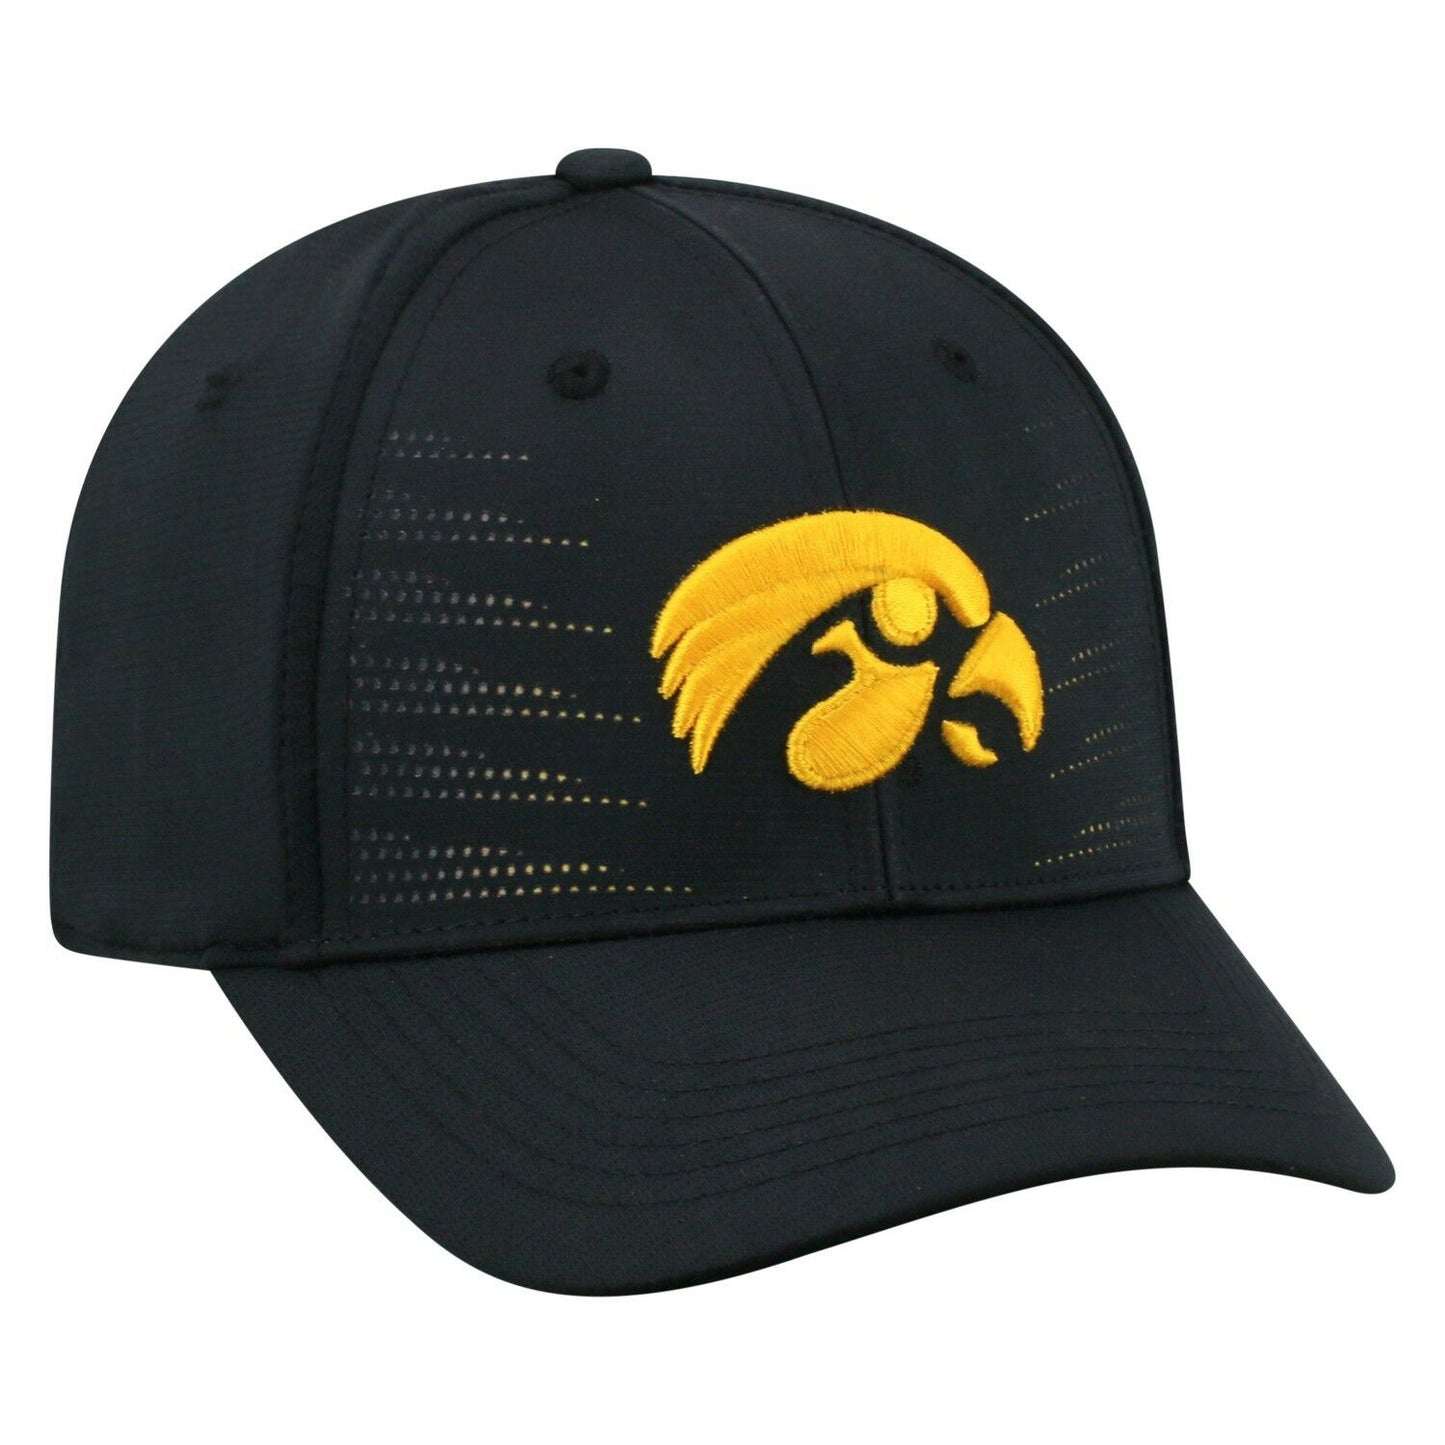 Mens Iowa Hawkeyes Dazed One Fit Flex Fit Hat By Top Of The World